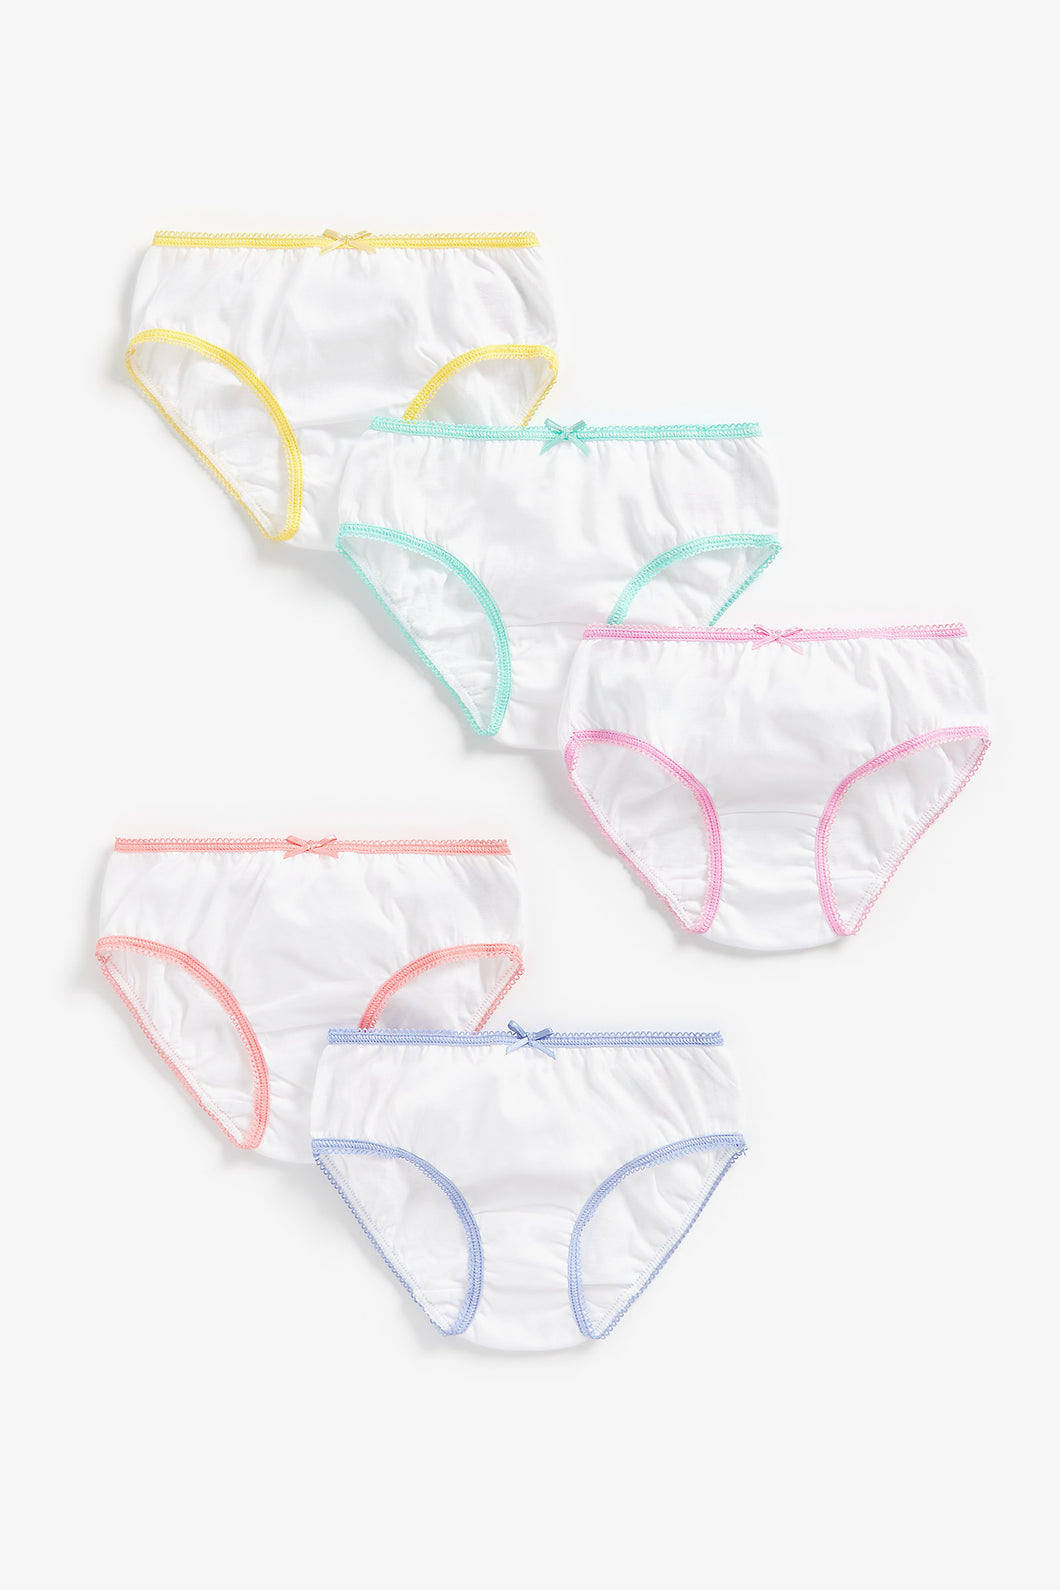 Mothercare White Briefs - 5 Pack